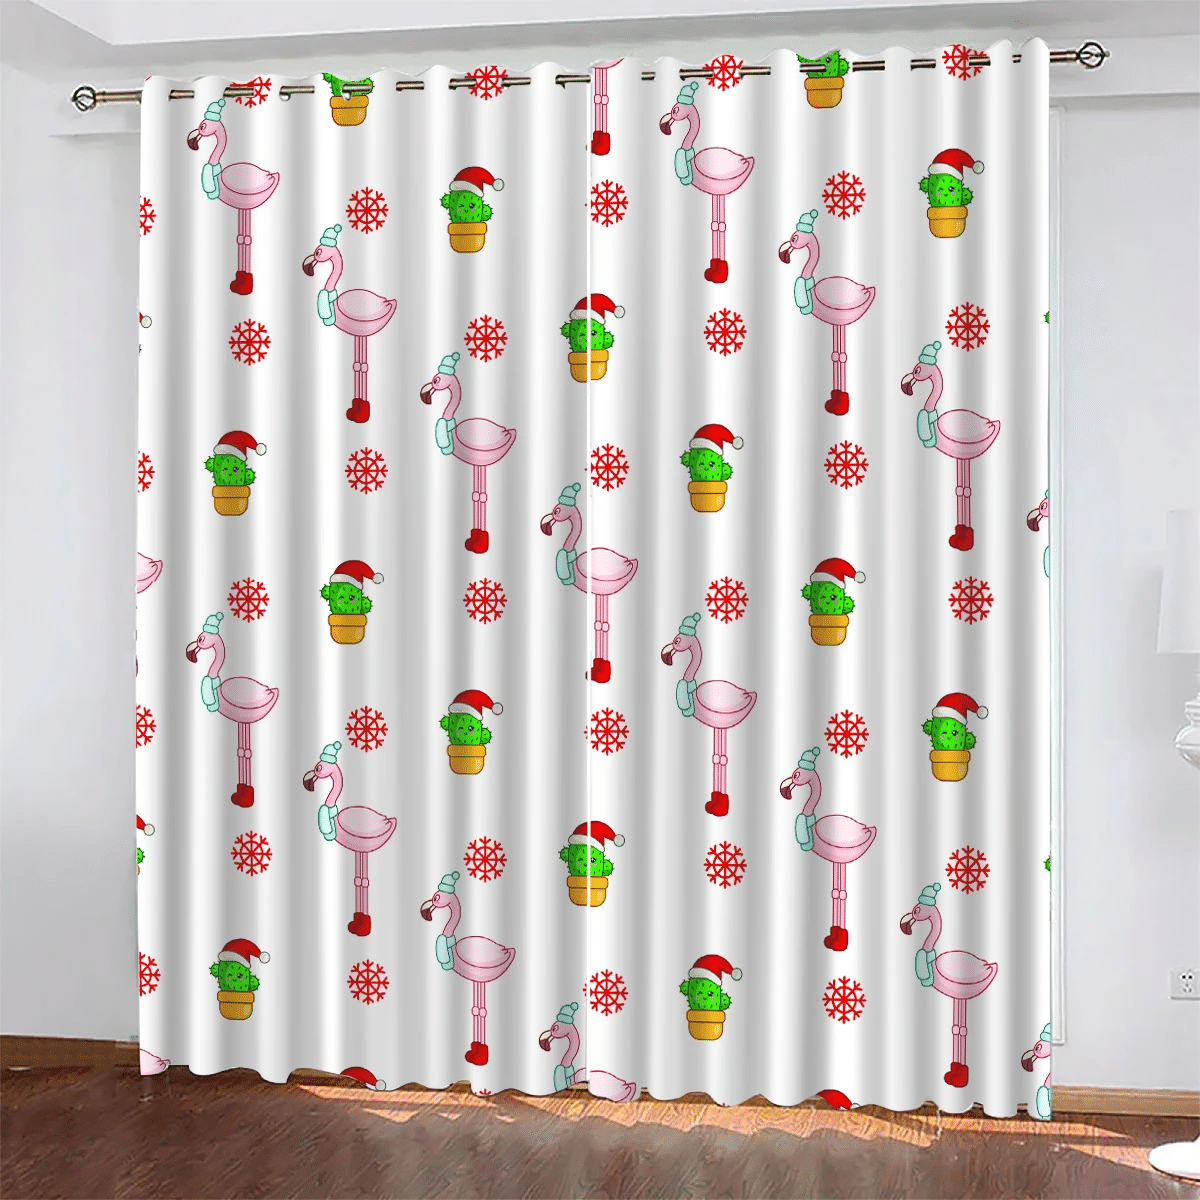 Christmas Time Flamingo Snowflakes And Cactus Window Curtains Door Curtains Home Decor